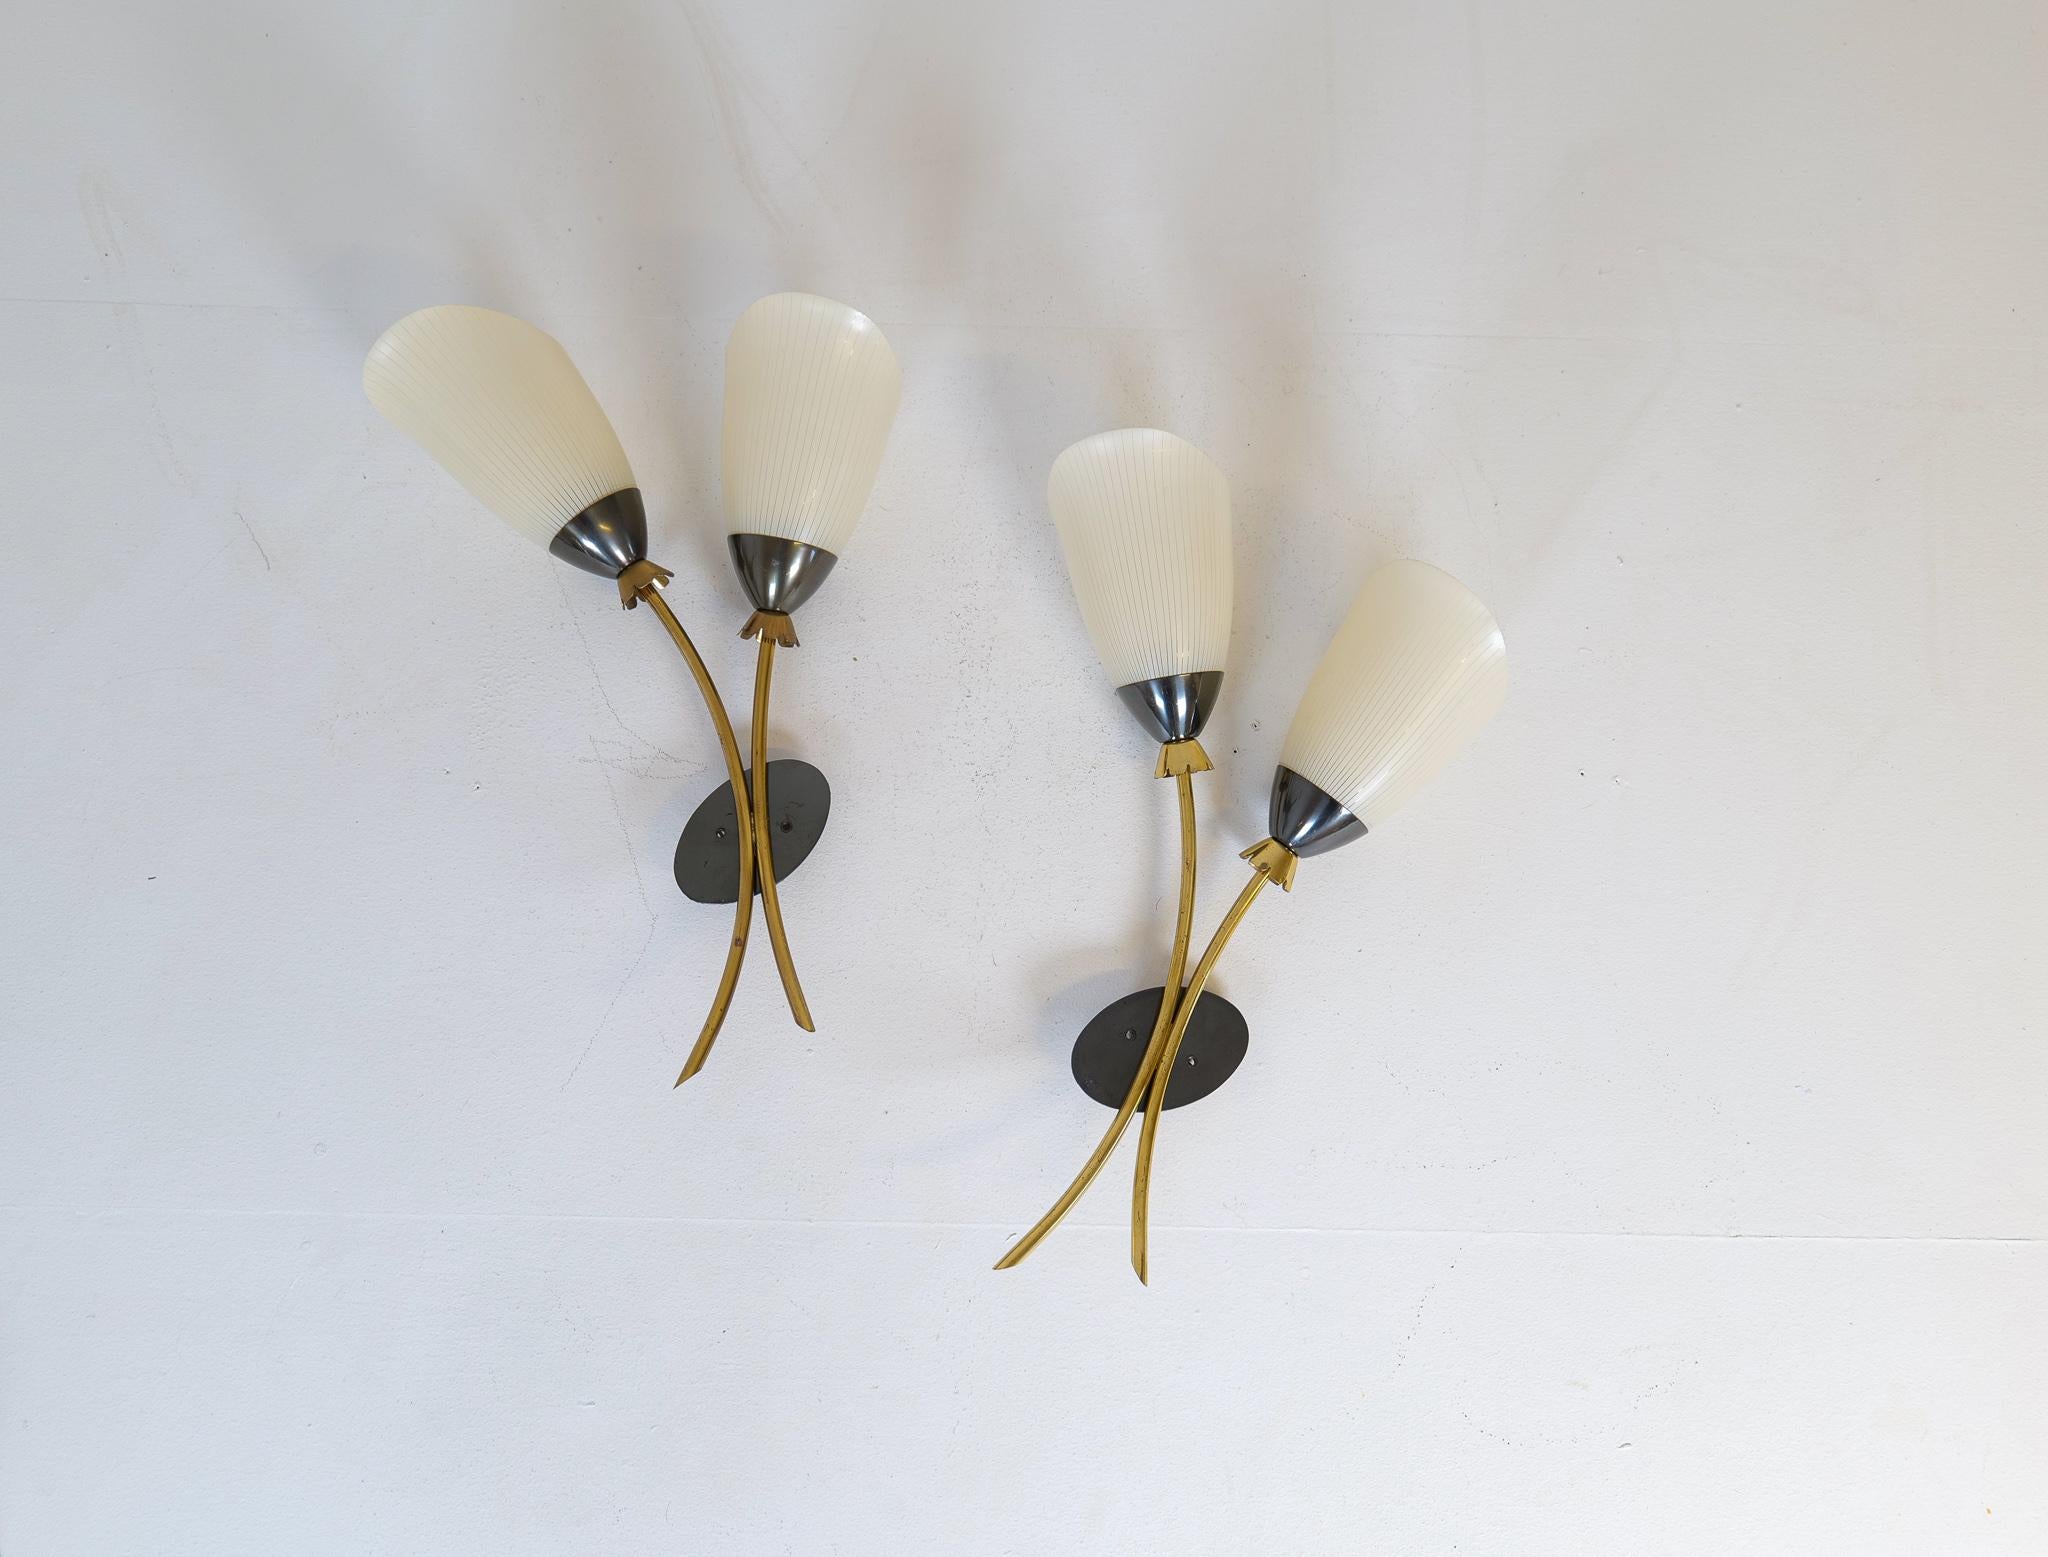 These wall mounted lamps were created in Sweden during the 1950s attributed to ASEA Belysning, 

Wonderfully sculptured with brass and matted opaline glass. The matted glass the light gets smooth and cozy. The combination of the golden metal and